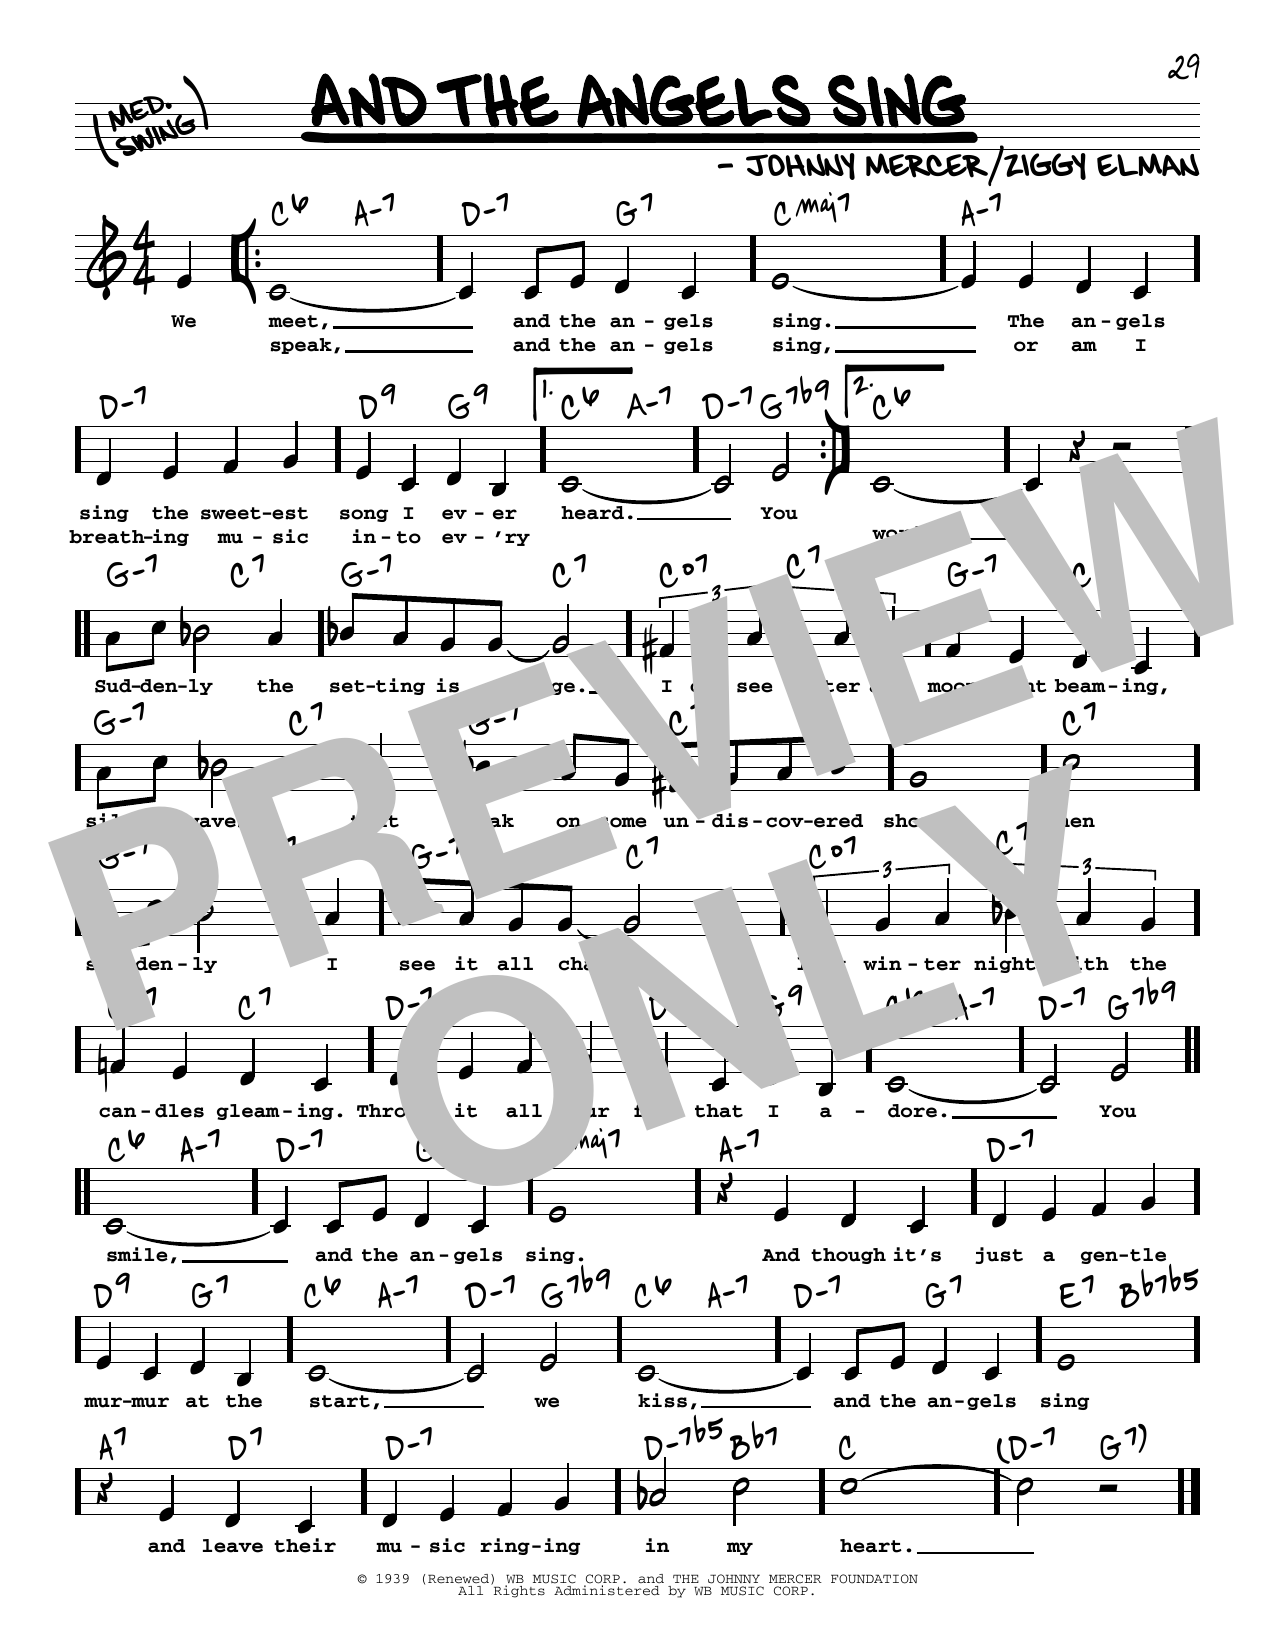 Download Benny Goodman And The Angels Sing (Low Voice) Sheet Music